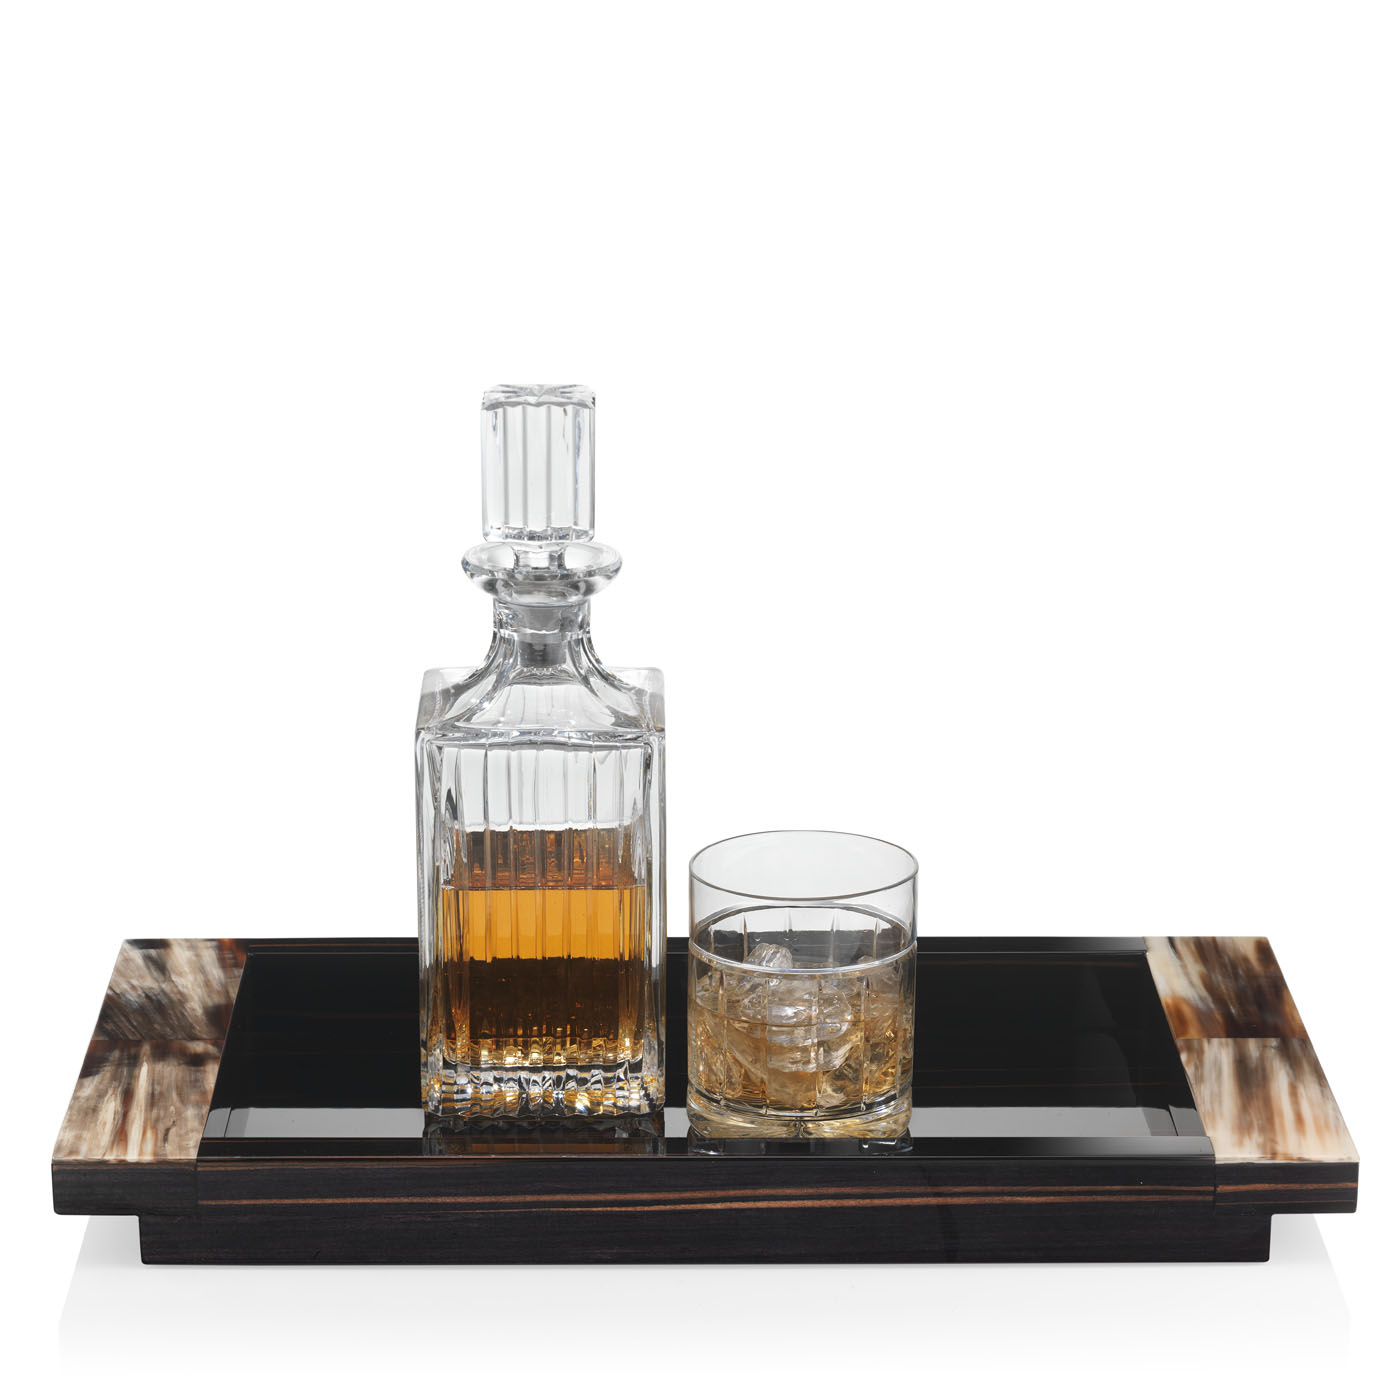 Tableware - Elia tray in horn and glossy ebony - ambiance picture - Arcahorn